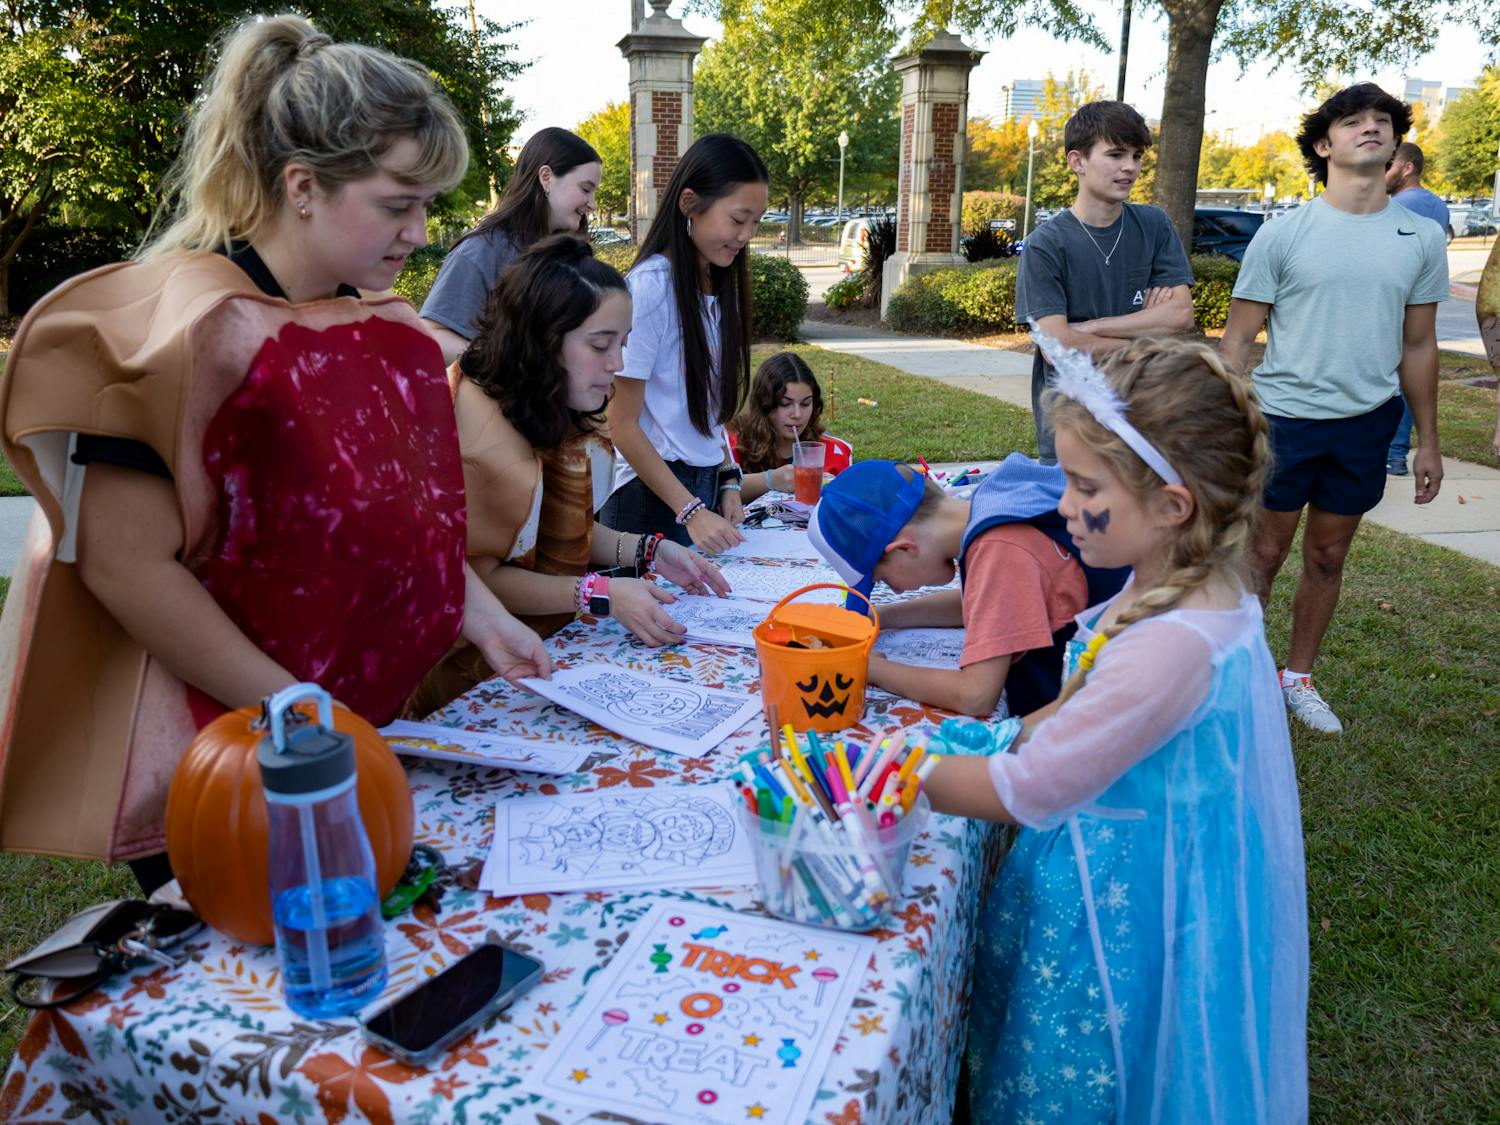 A young girl in a princess costume draws on a coloring sheet at one of the Trick or Treat with the Greeks' activity tables on Oct. 25, 2022. USC Greek fraternities and sororities welcomed community members to Greek Village for an evening of games, fun activities, unity and trick or treating.